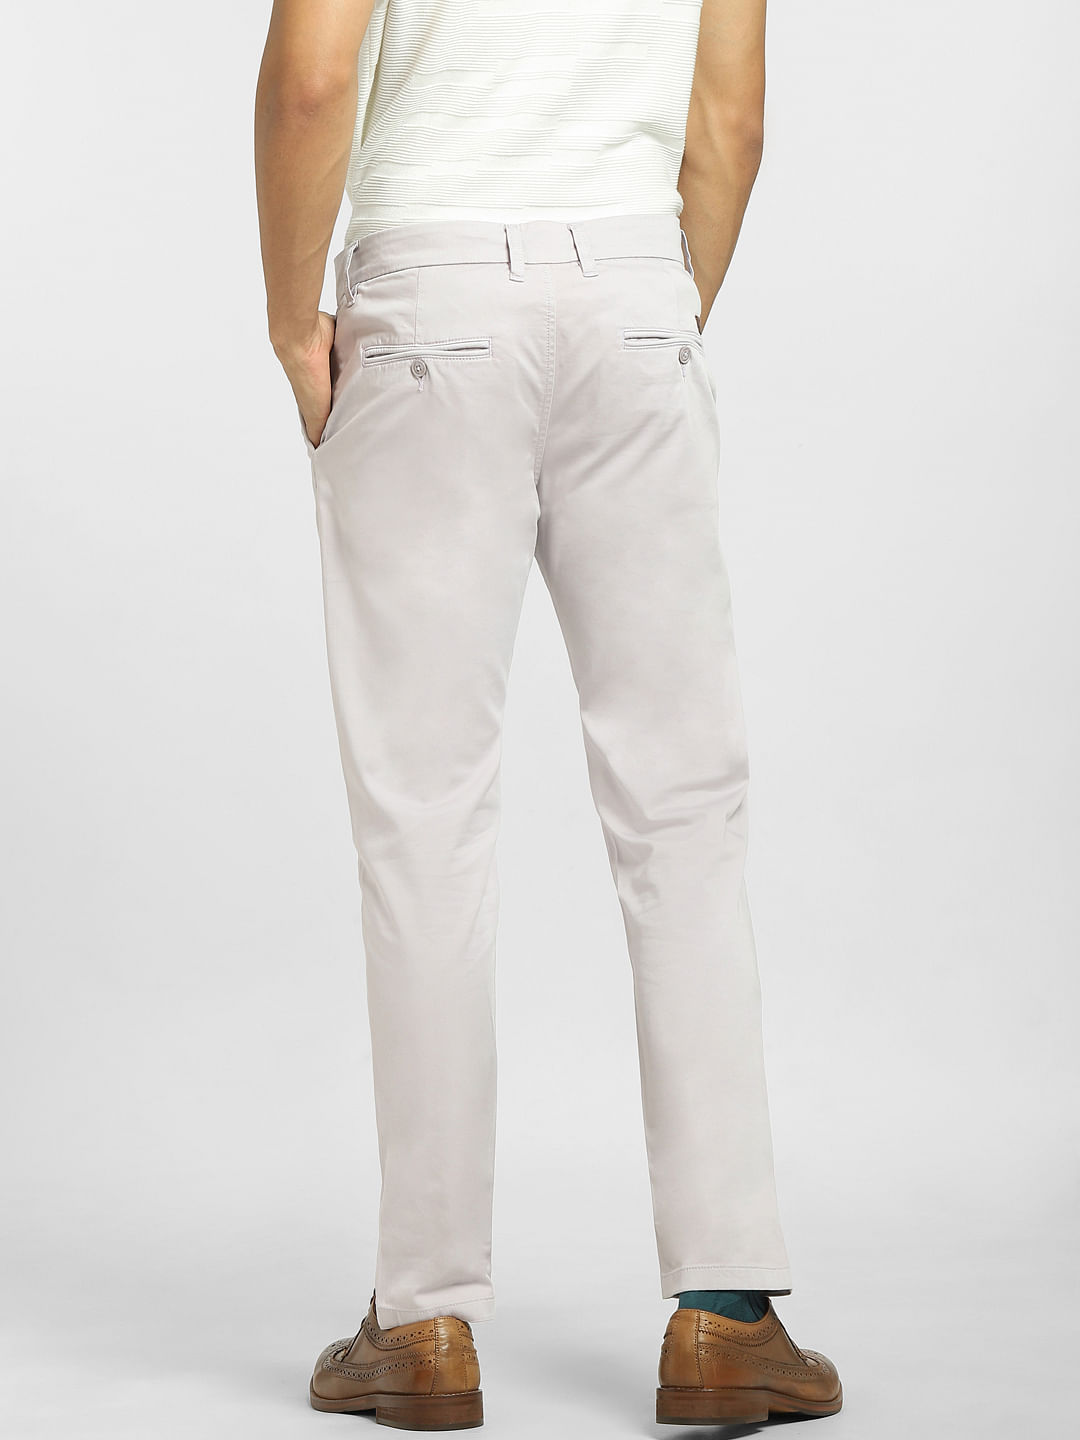 Buy Mens Casual Chinos Trousers Cream and Yellow Combo of 2 PV Cotton for  Best Price, Reviews, Free Shipping